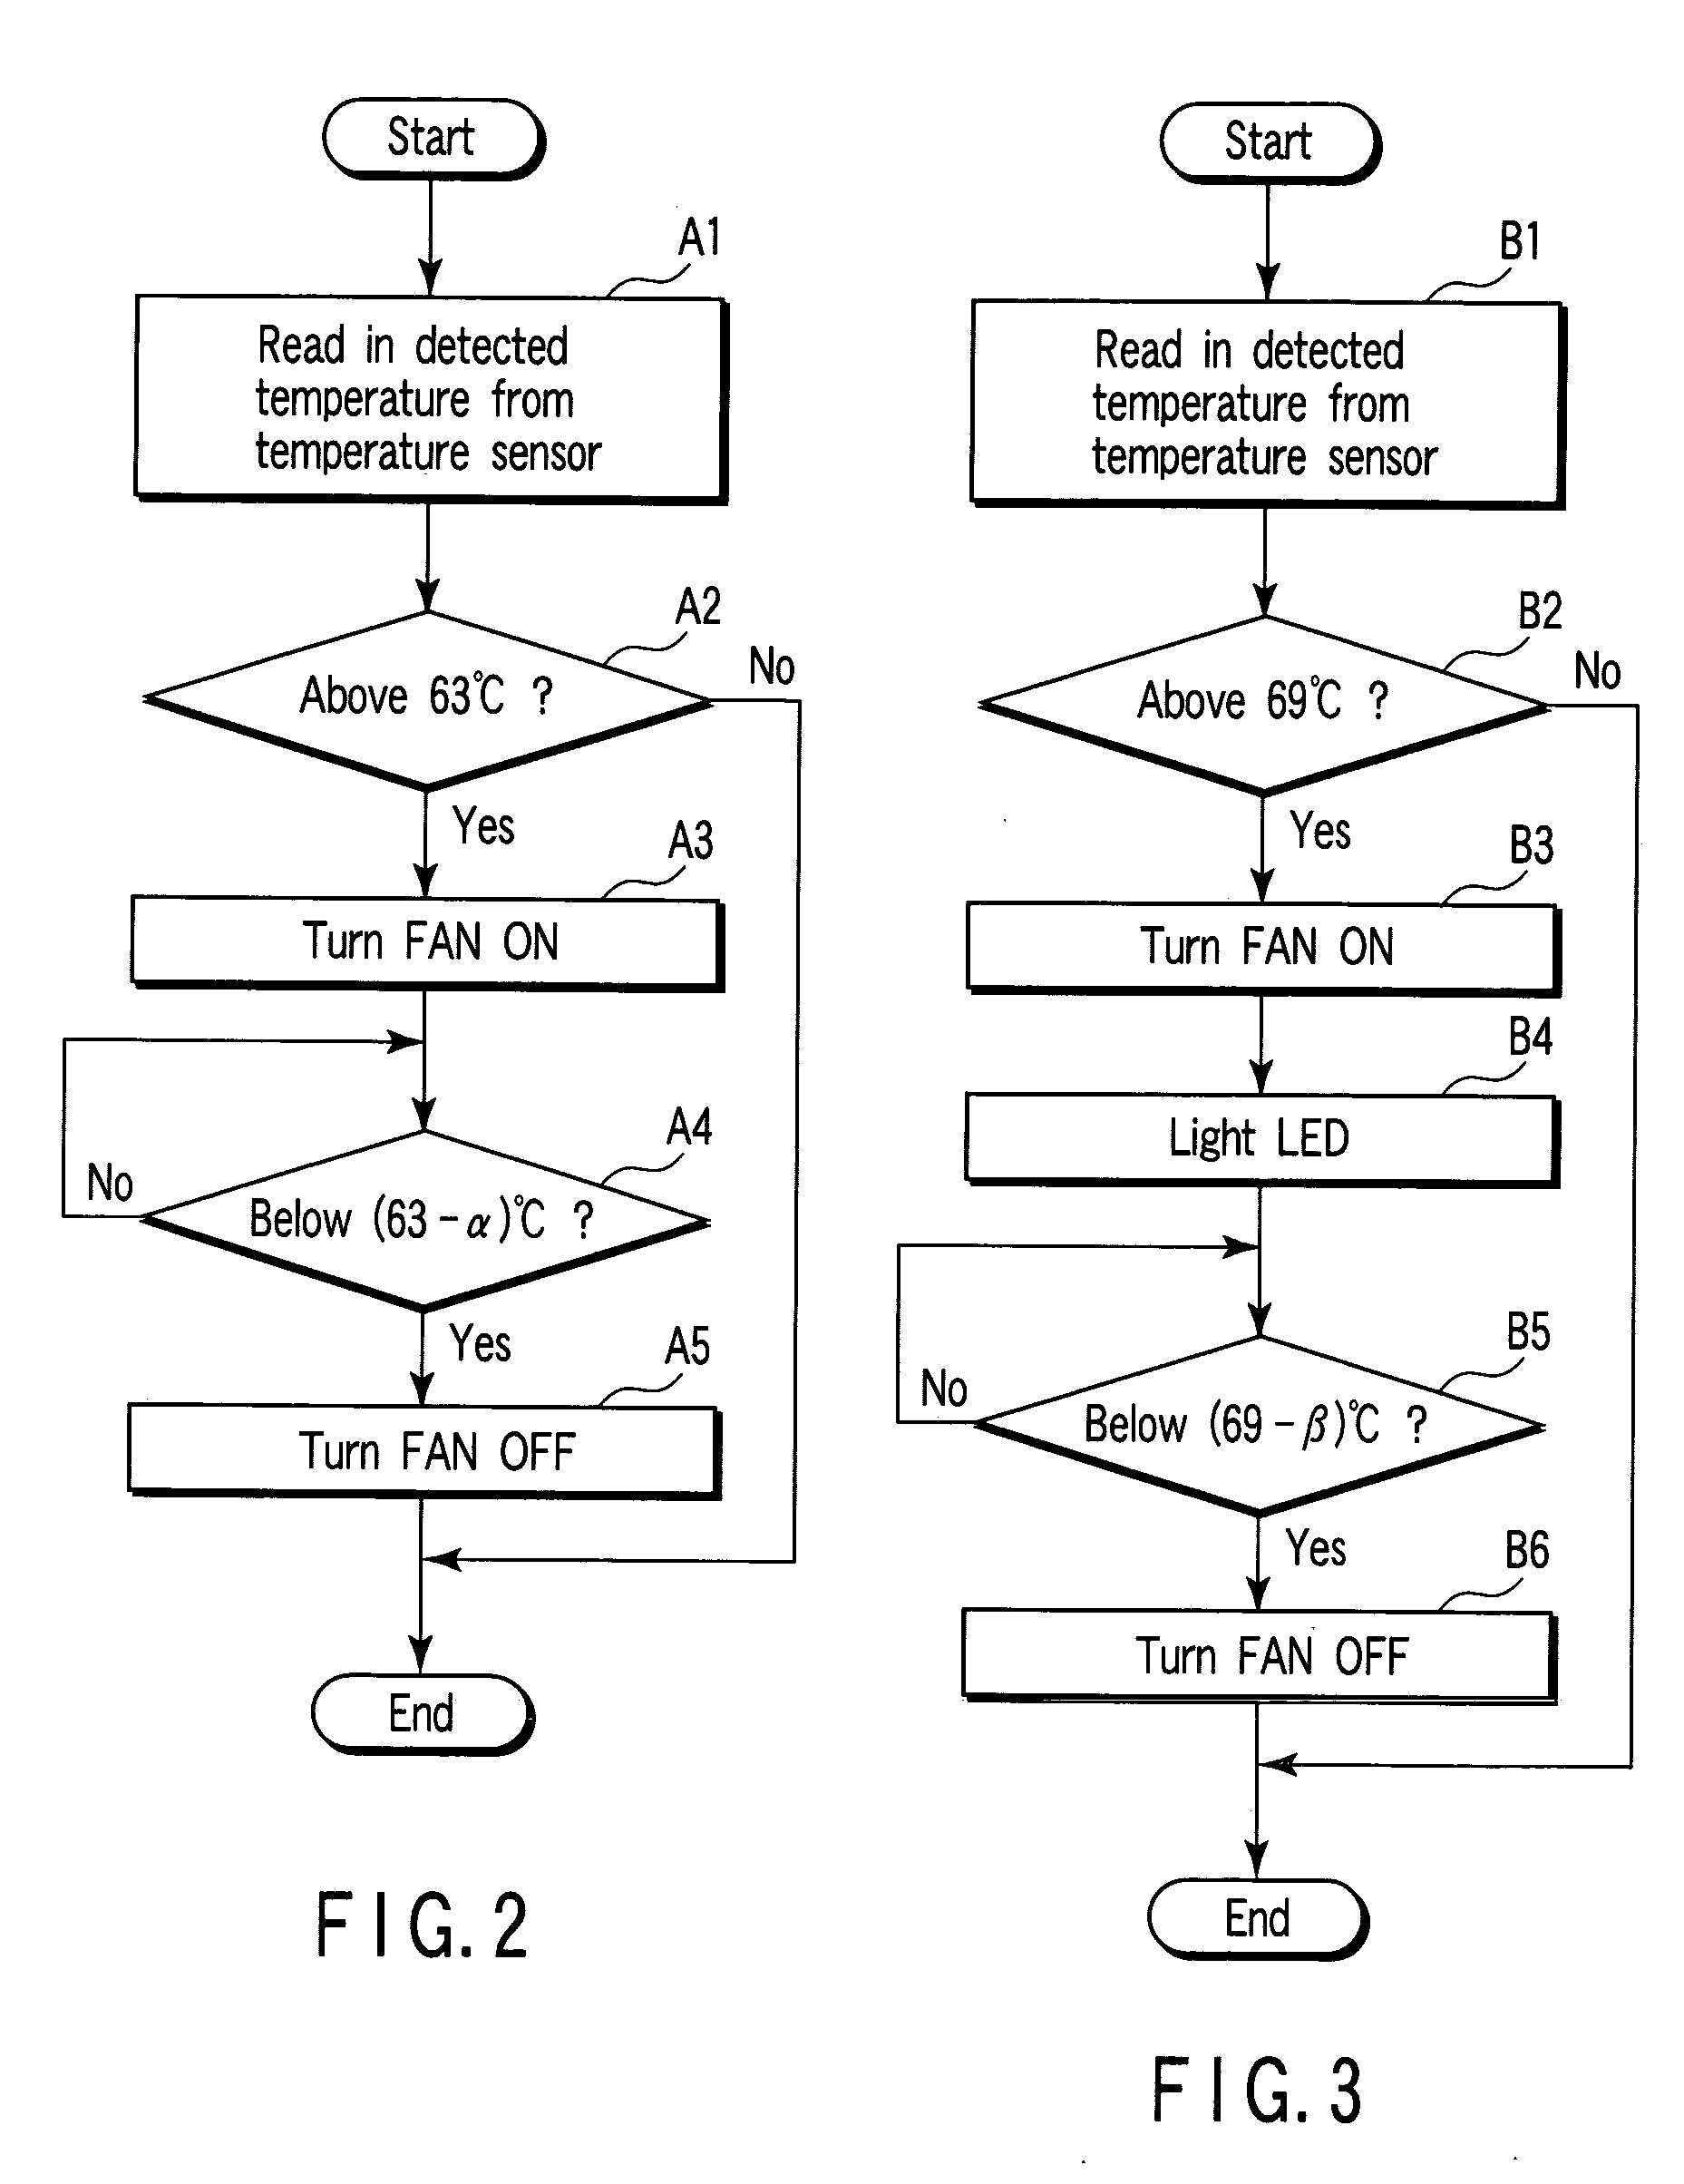 Electronic apparatus that allows cooling fan to be driven with certainty even at the time of software malfunction/lock-up or at the time of controller failure